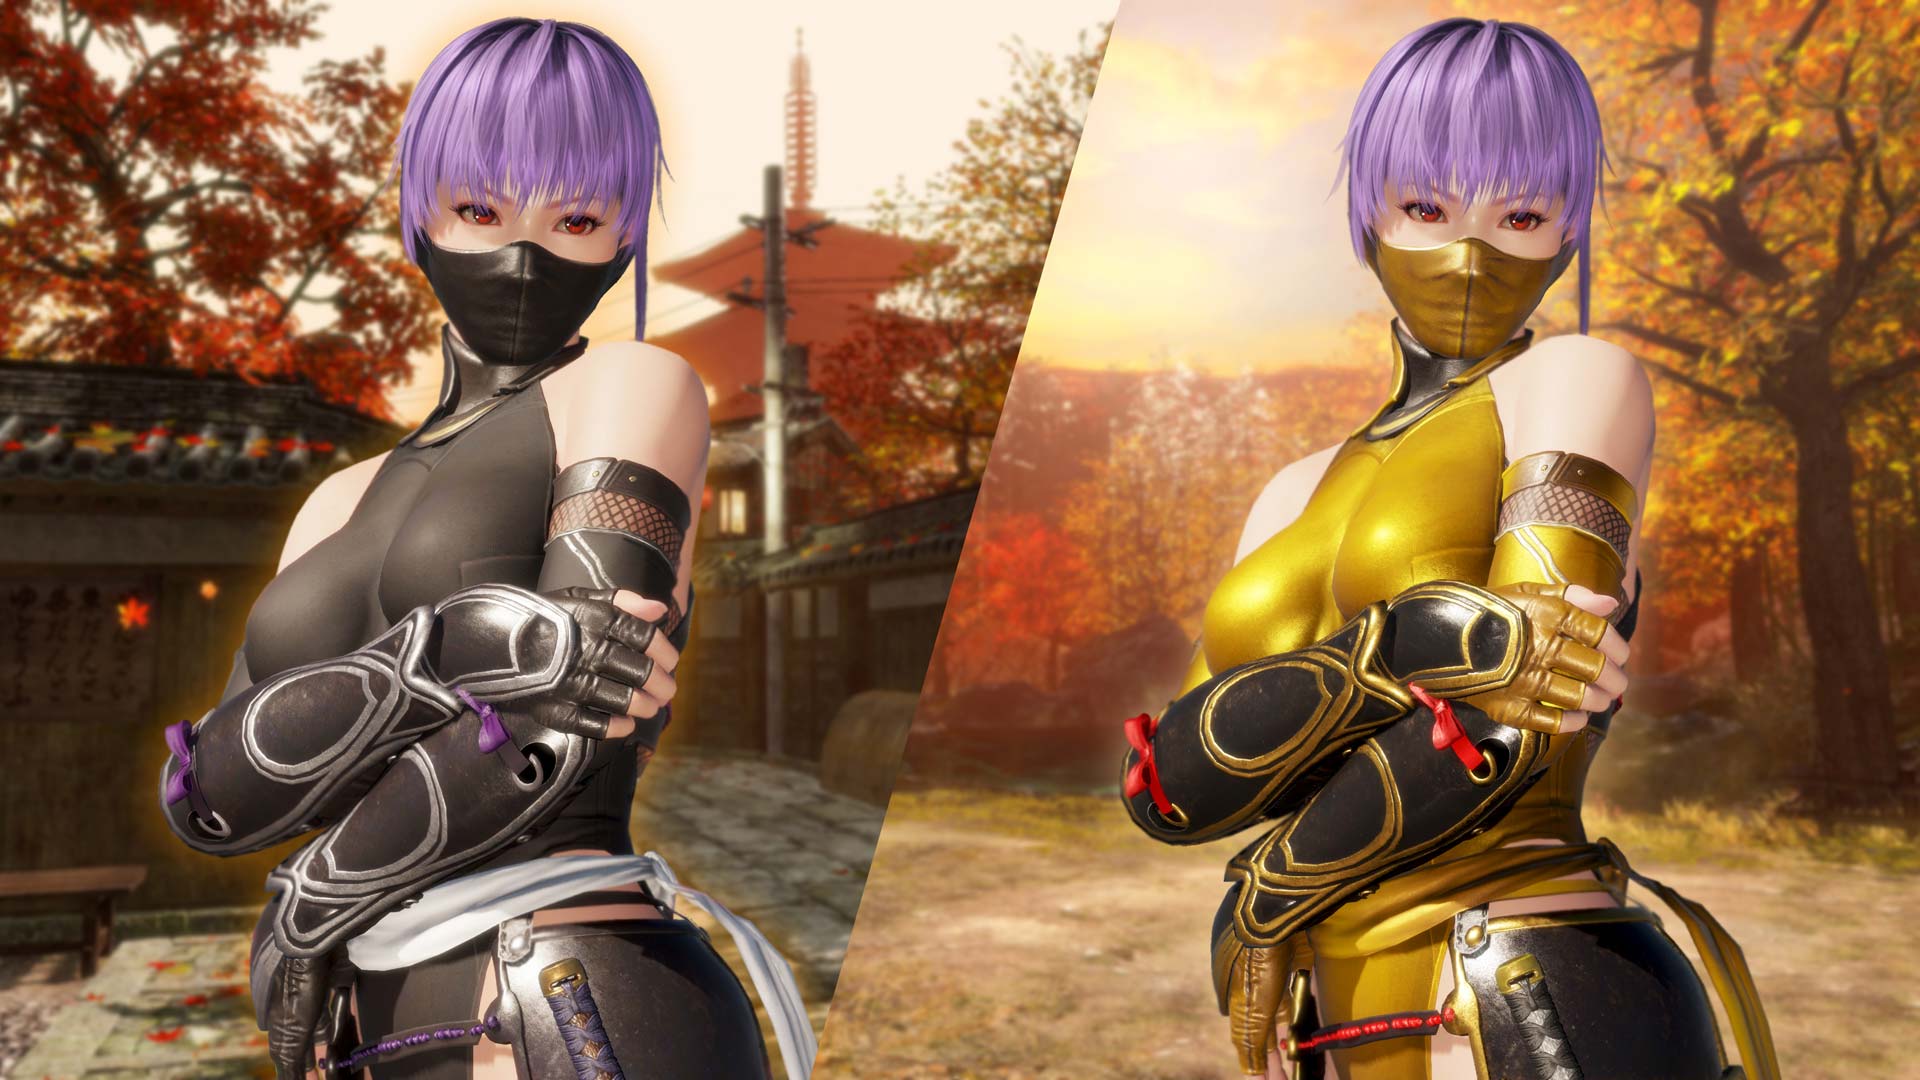 Ayane Dead Or Alive 1920x1080